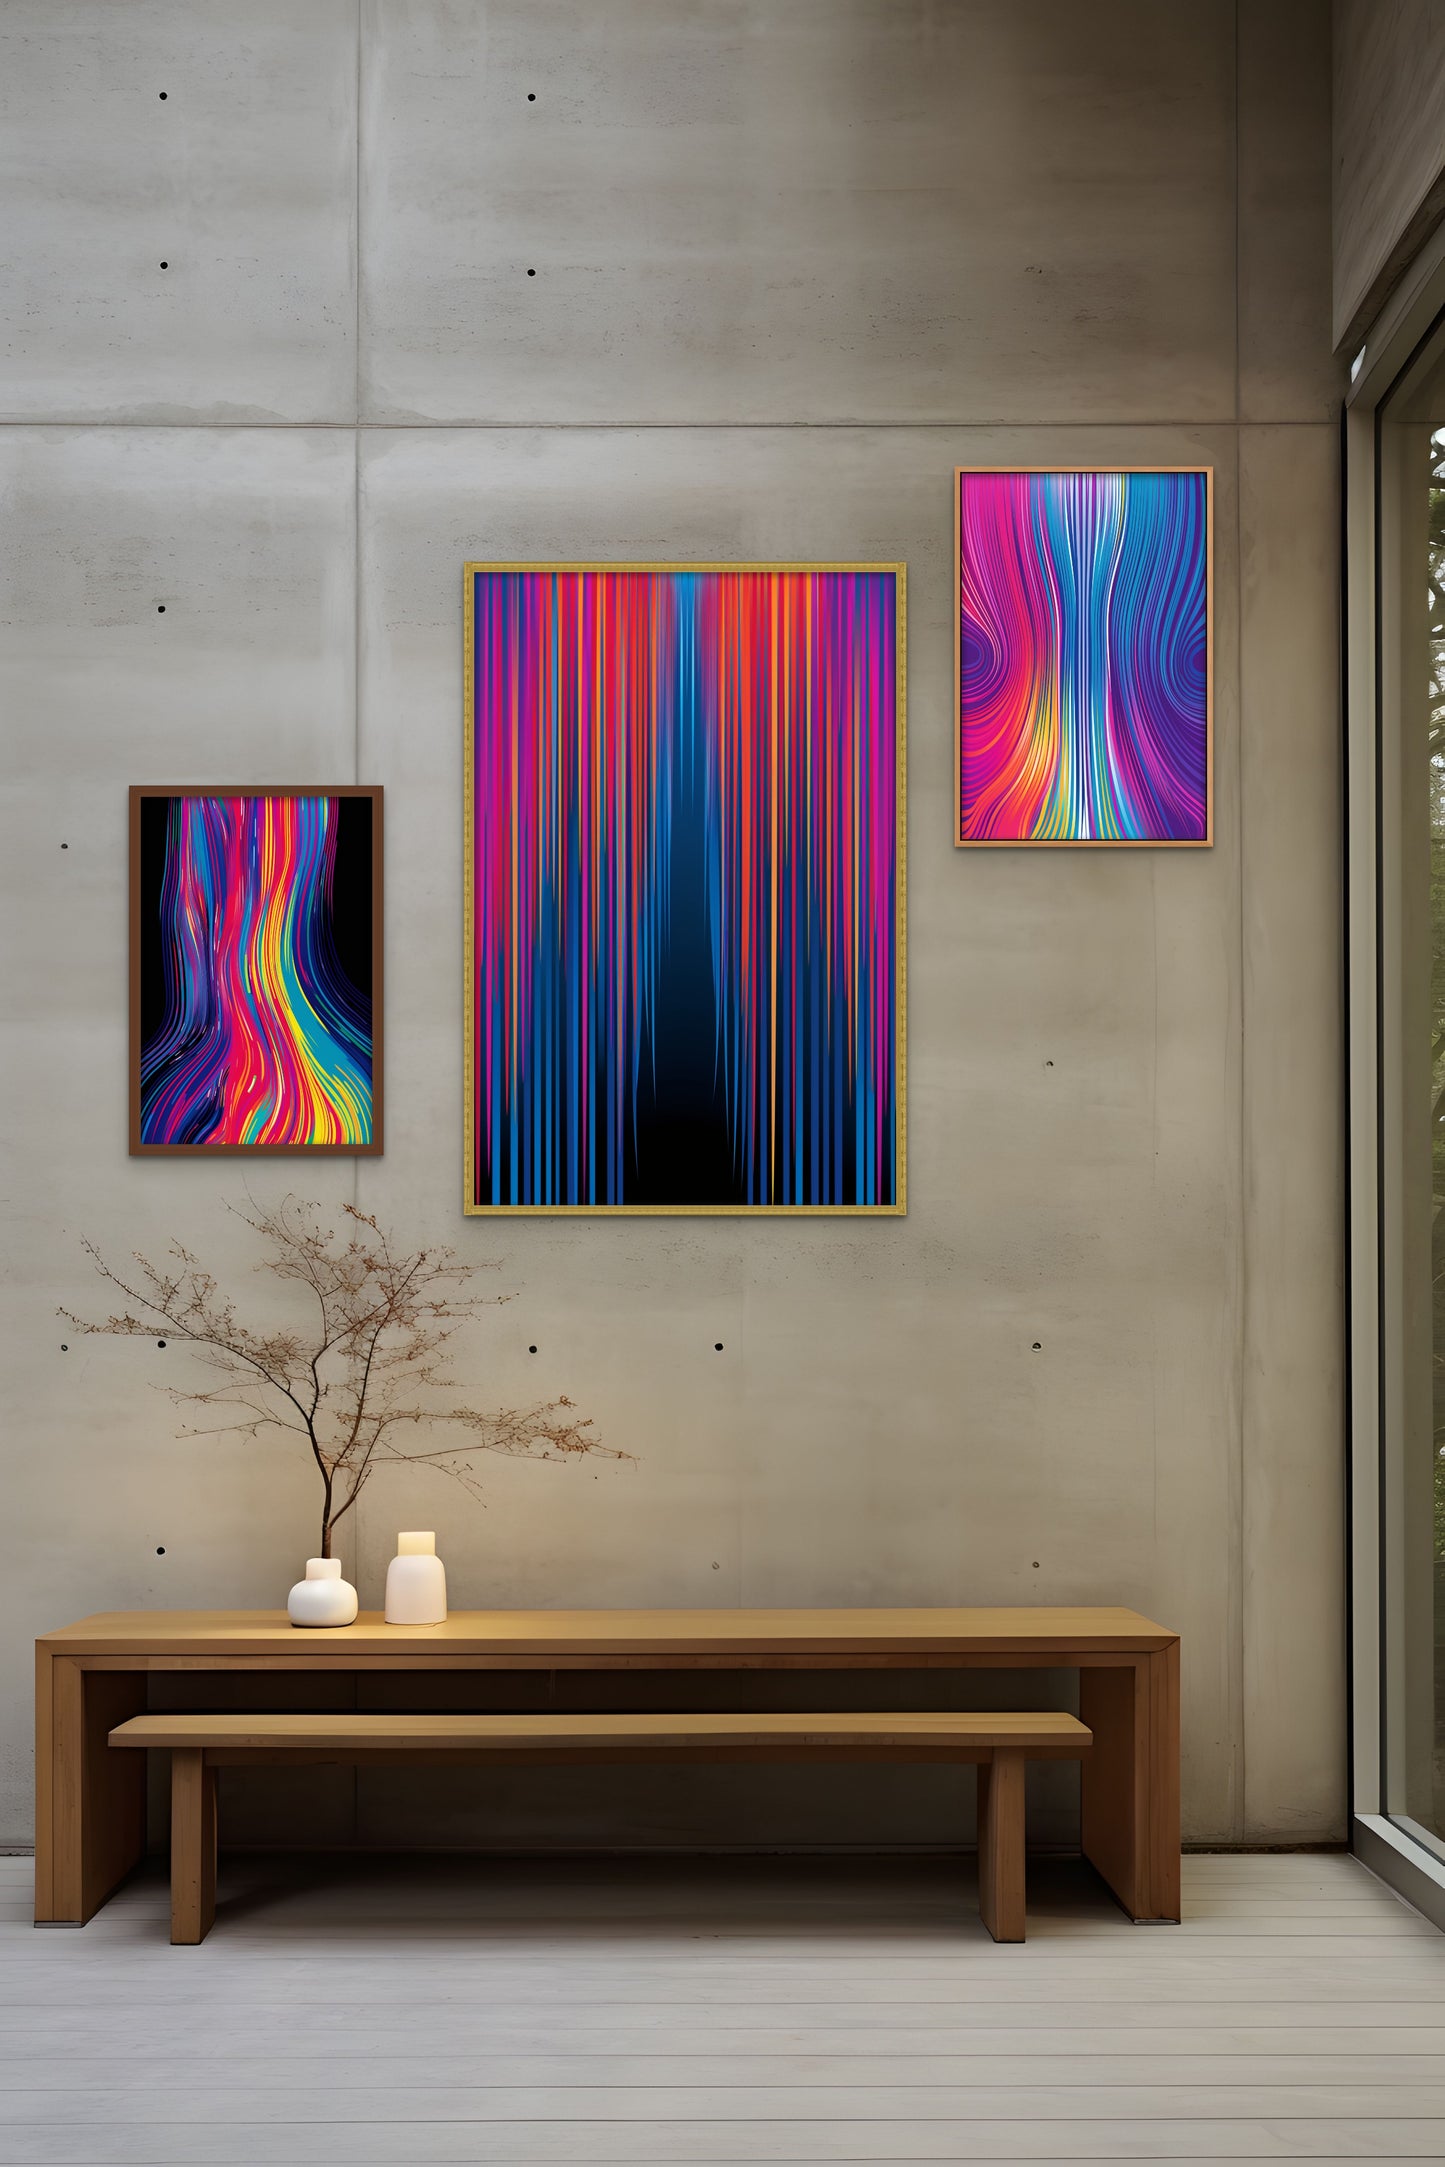 Three abstract vibrant paintings on a concrete wall above a wooden bench with a vase and branches.